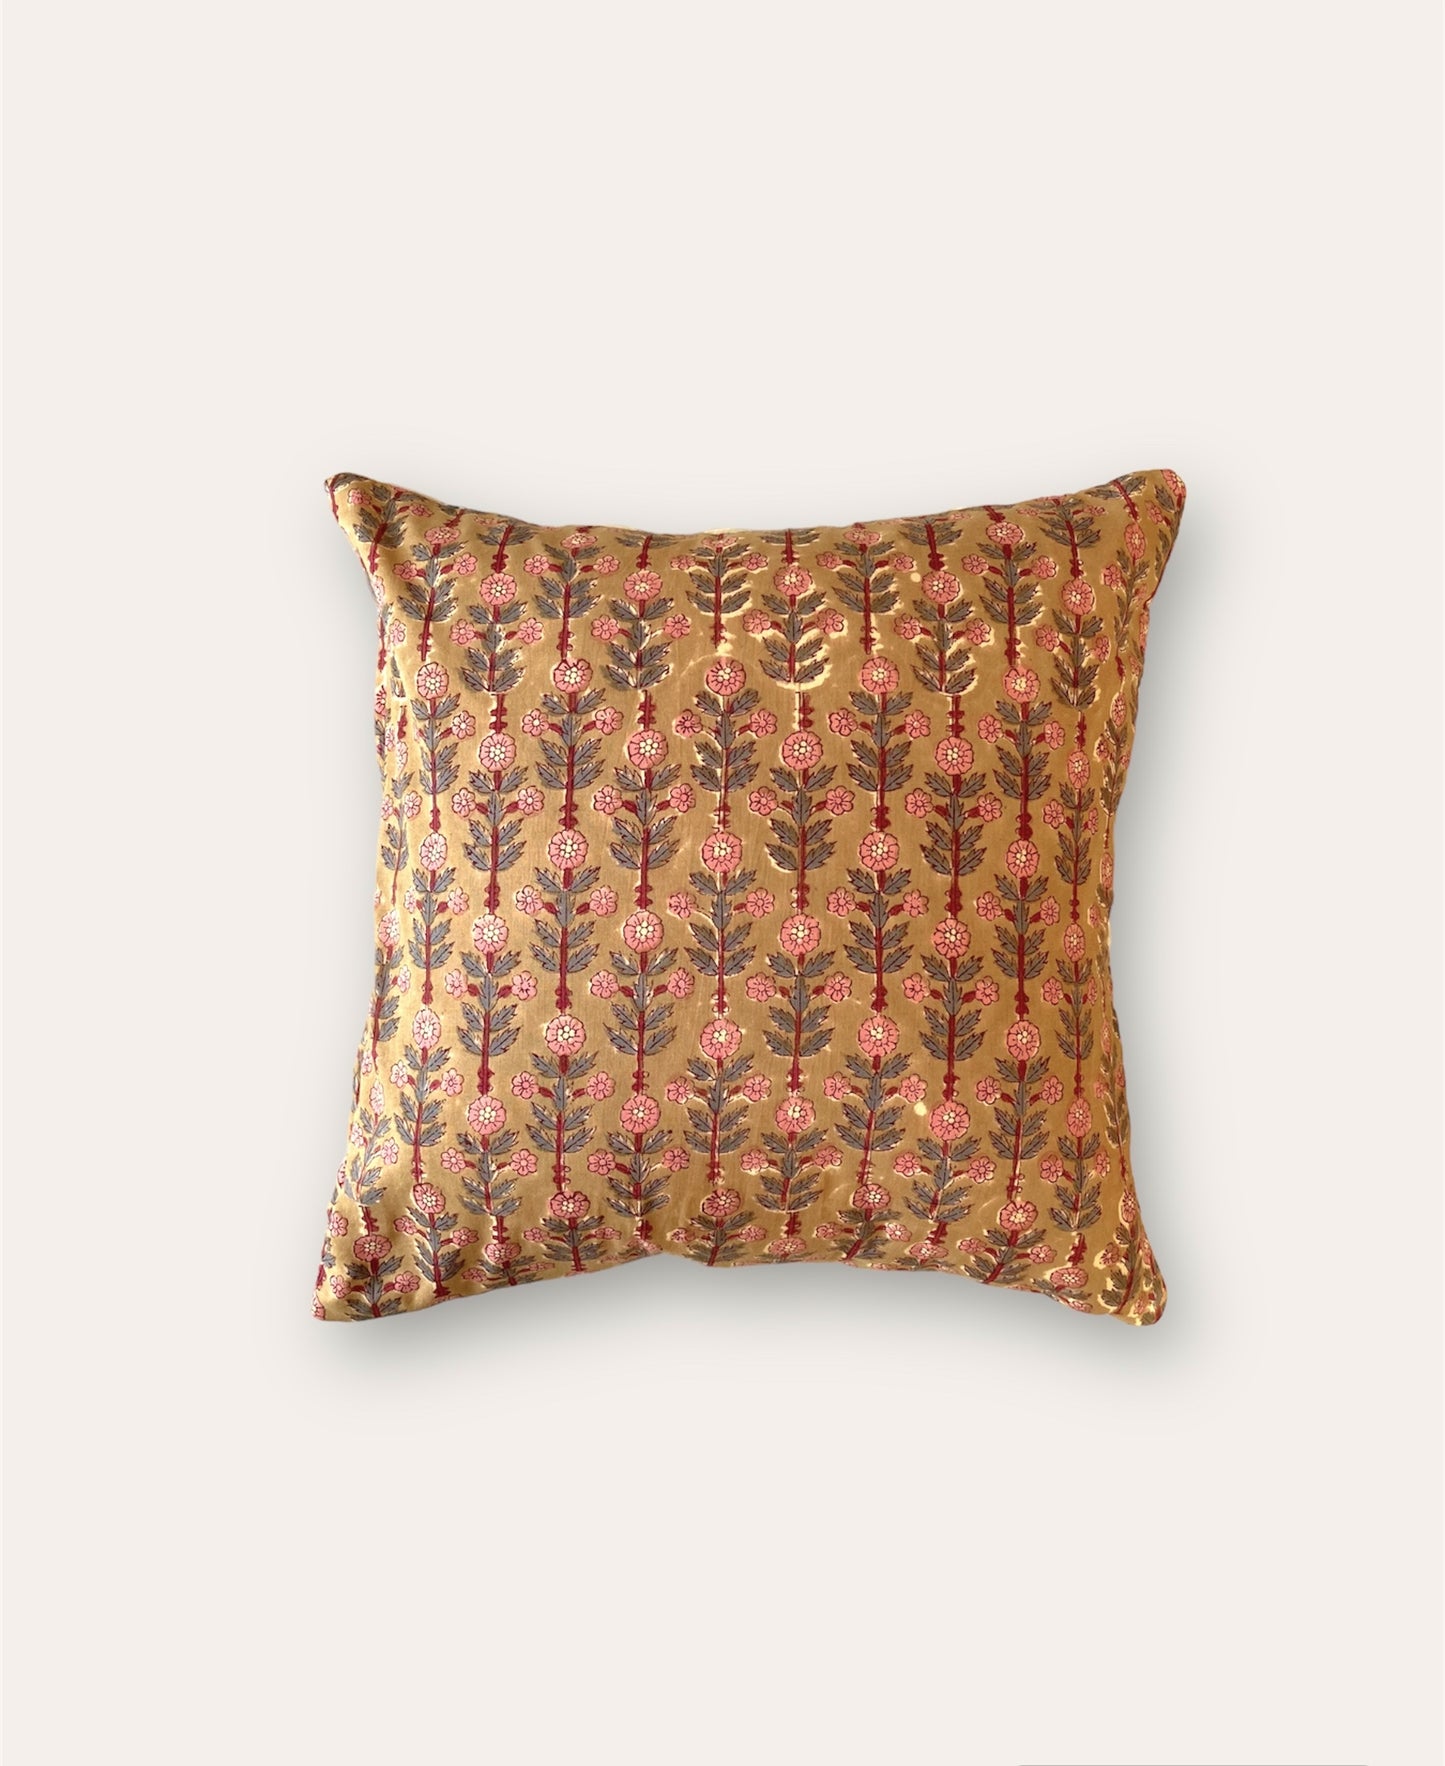 Hand Block Print Cathedral Window Patchwork Cushion Cover